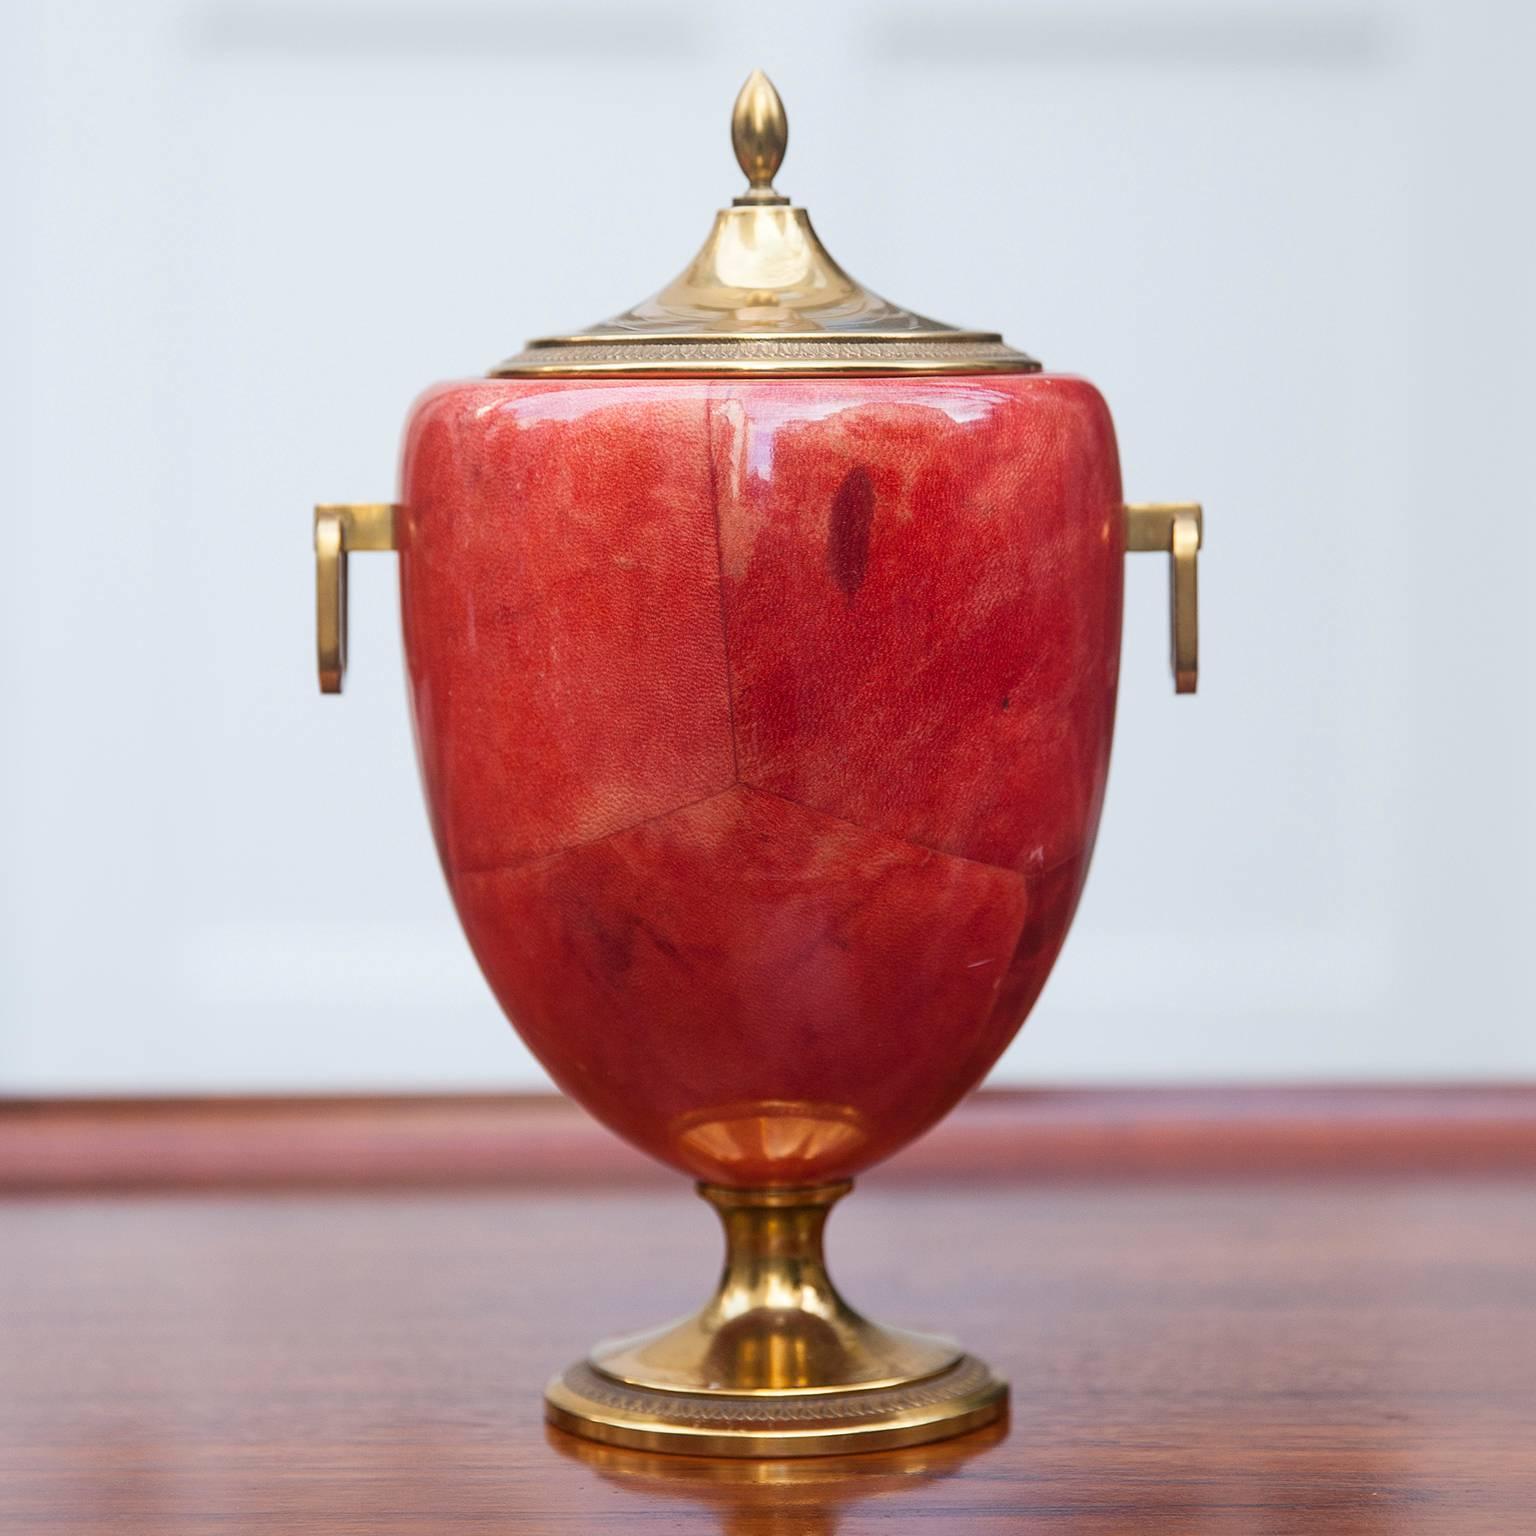 Wonderful Aldo Tura ice bucket in light red colored goatskin with brass applications and glass inlay made in the 1960s.